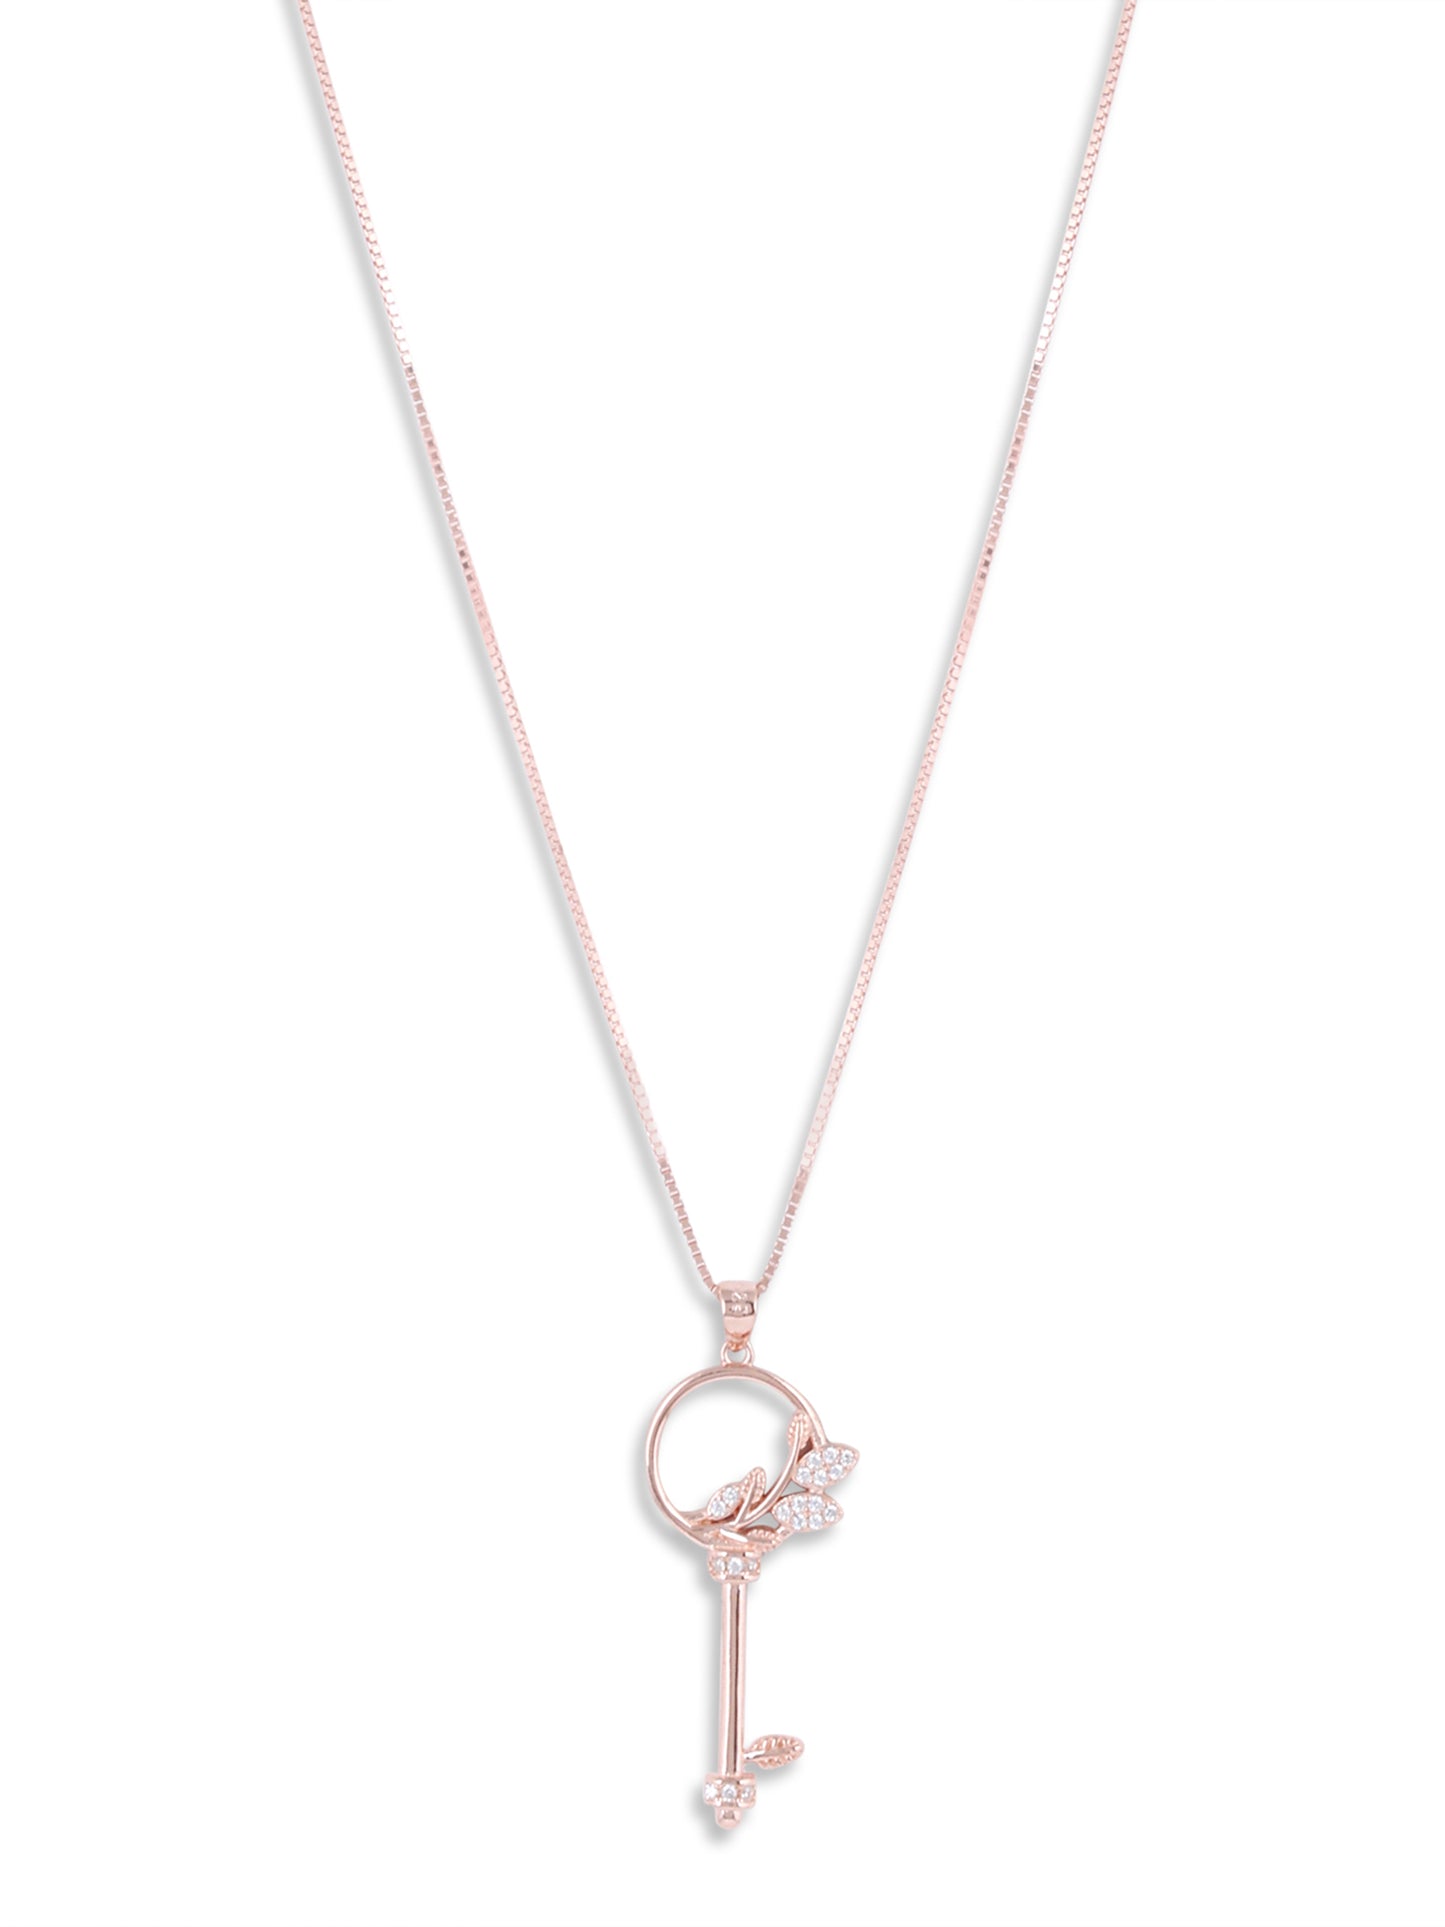 Crystal Garden Key Rose Gold Pendant with chain